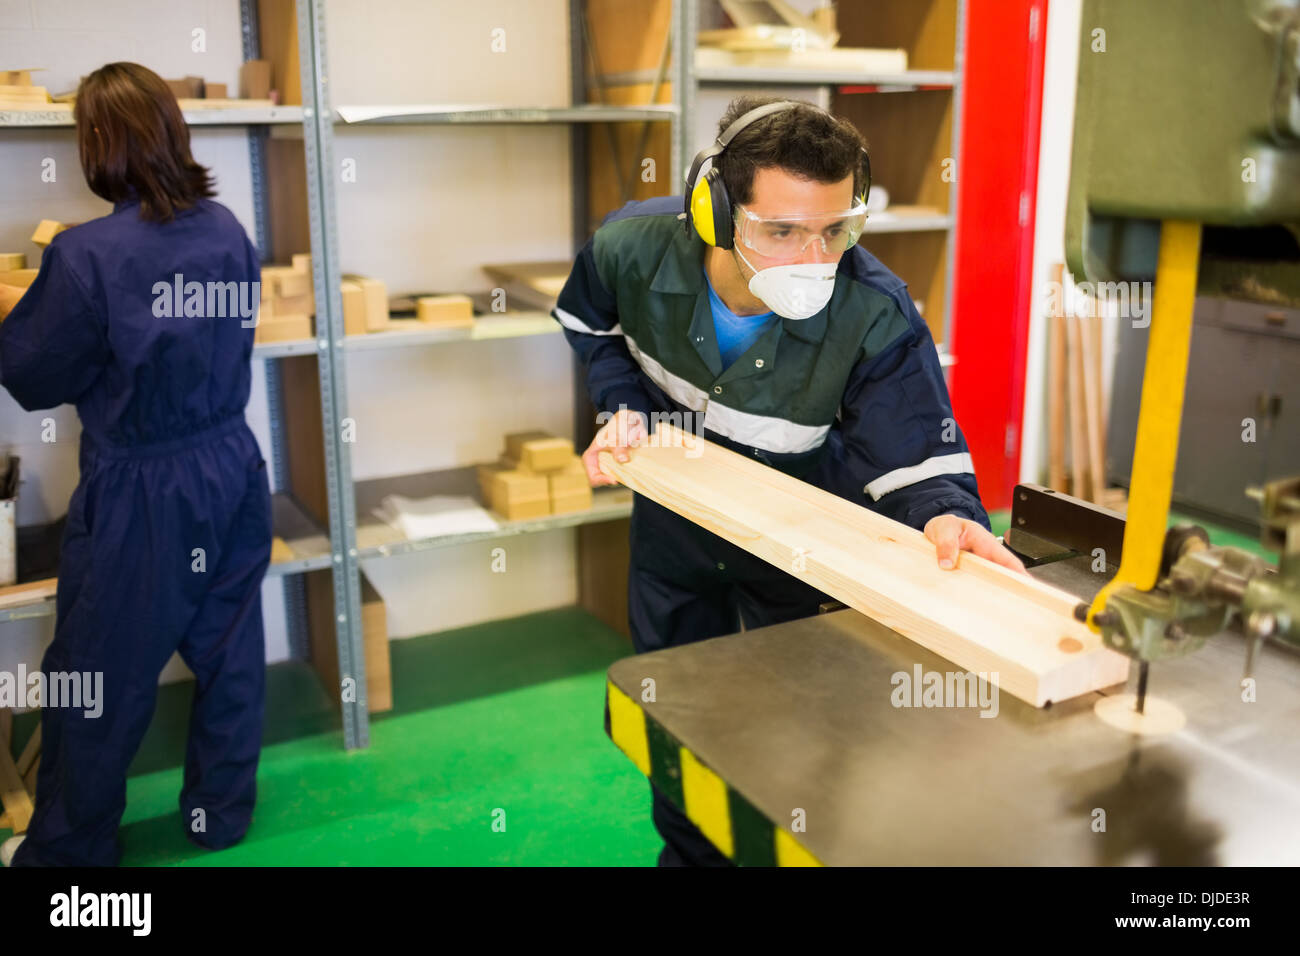 Focused craftsman wearing safety protection using saw Stock Photo